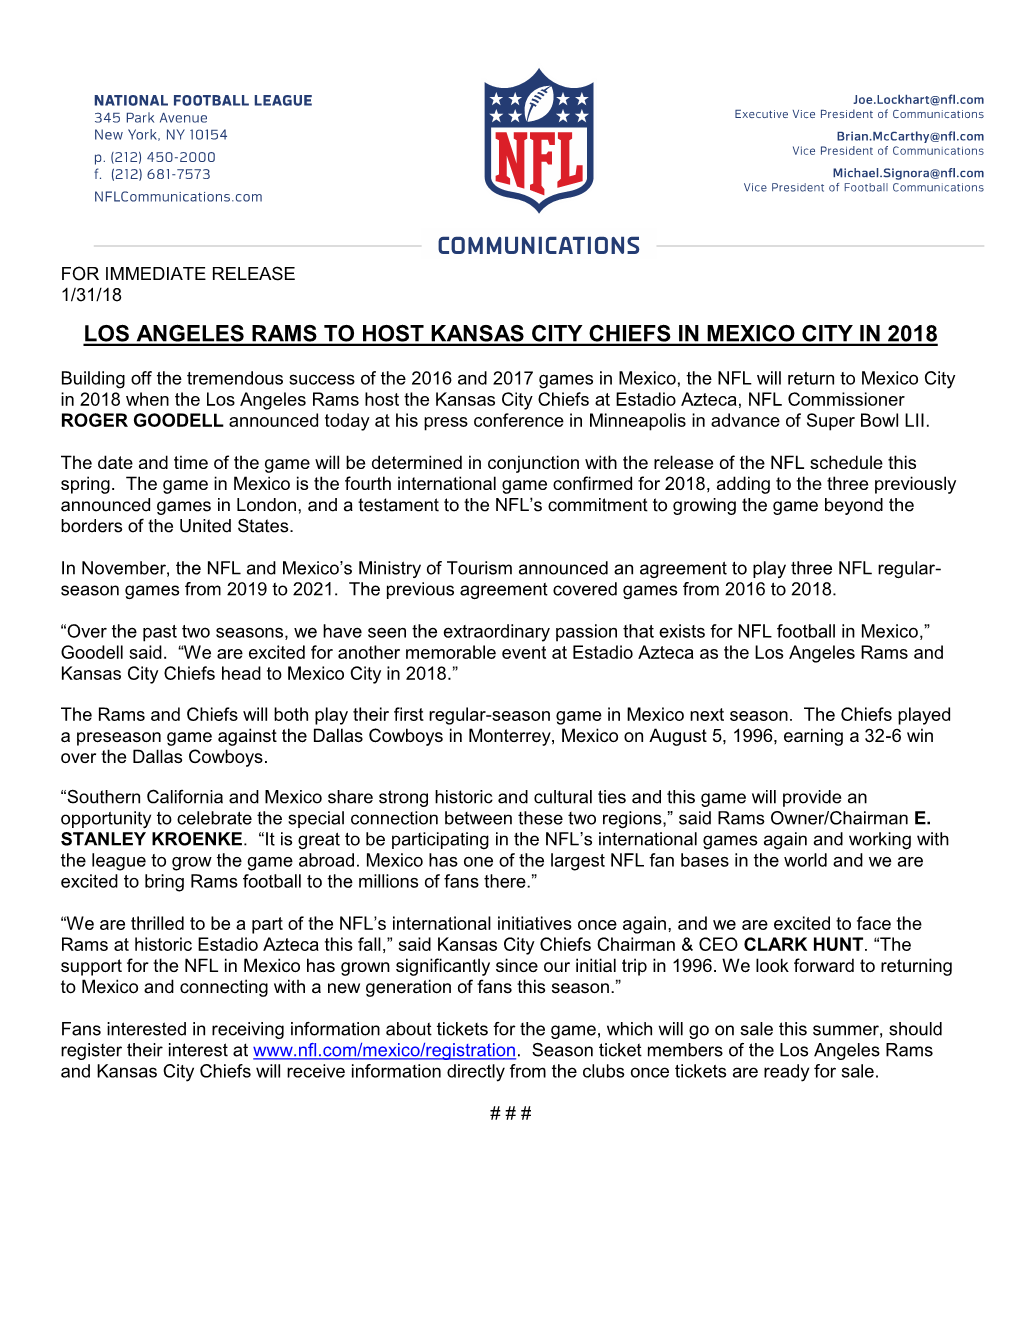 Los Angeles Rams to Host Kansas City Chiefs in Mexico City in 2018